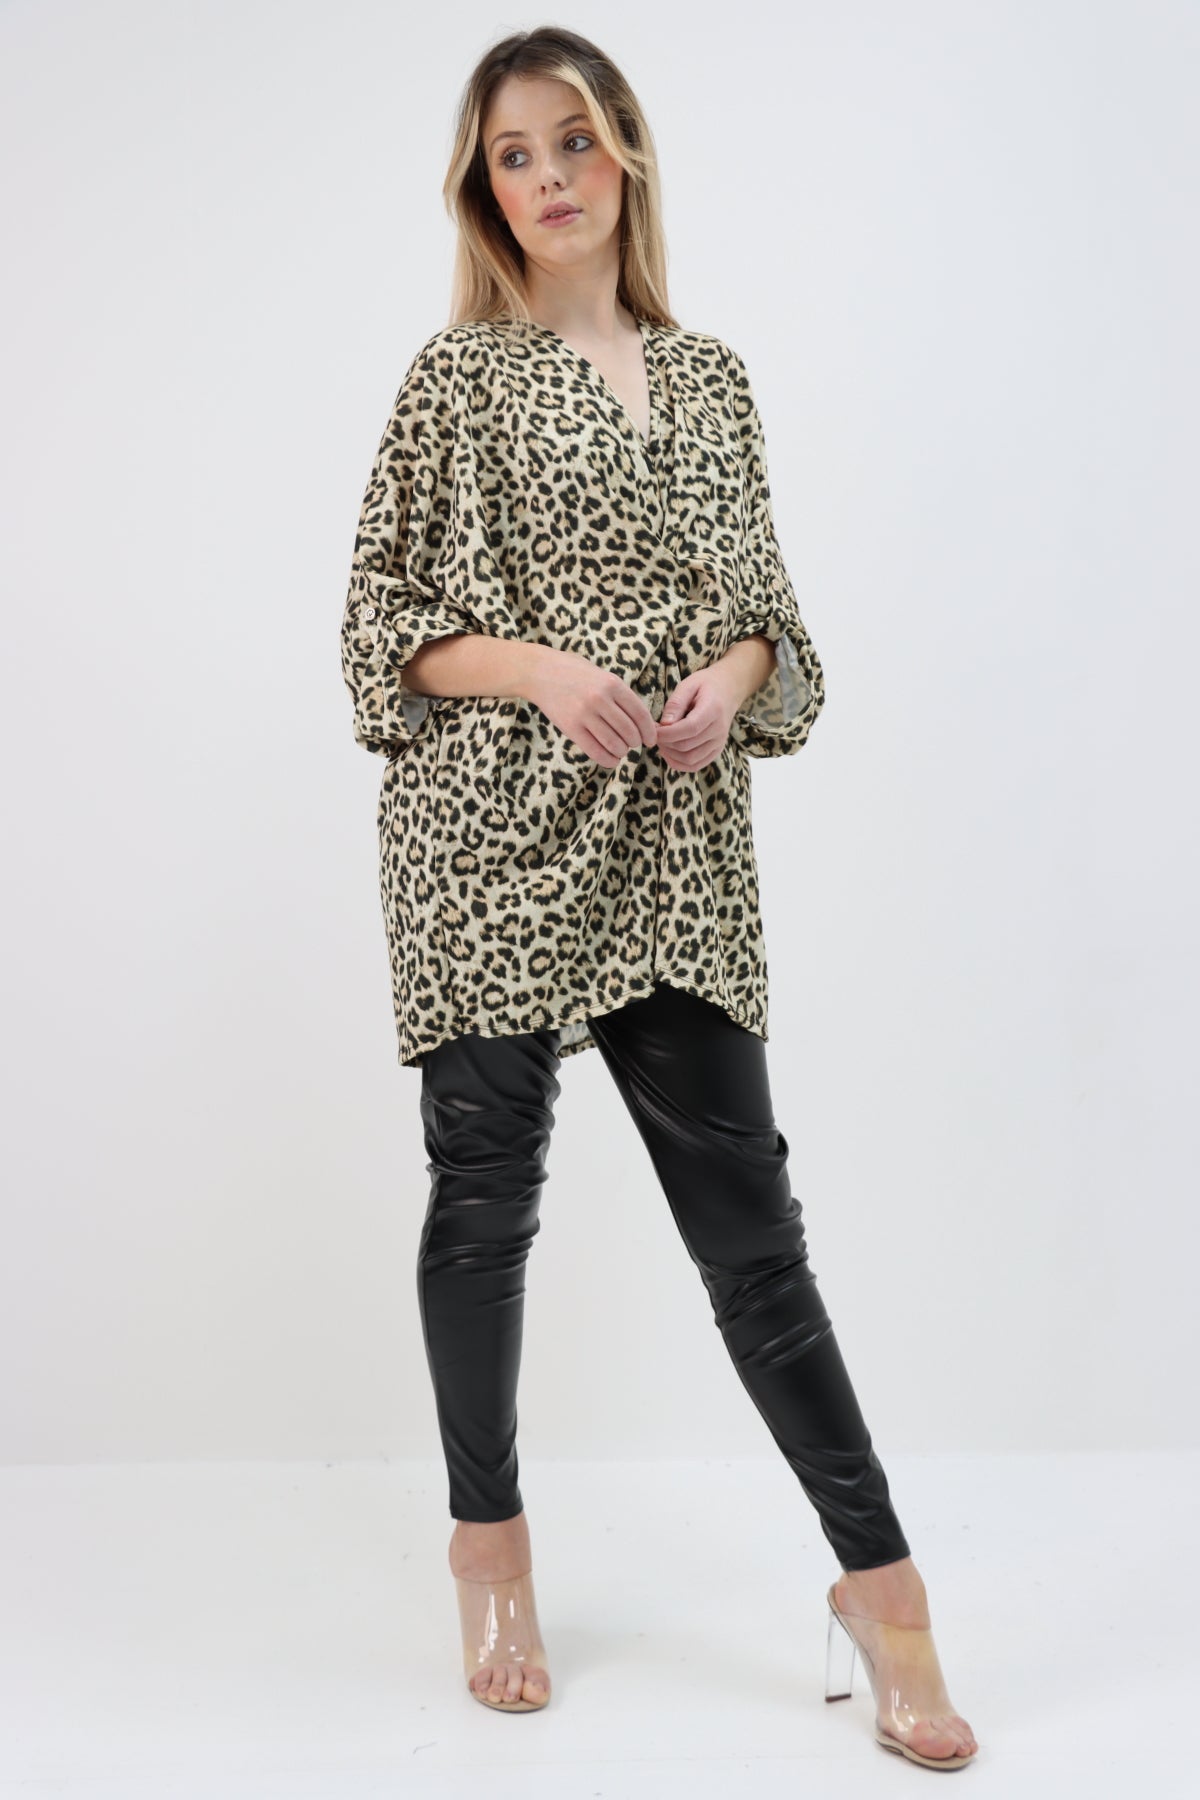 Italian Leopard Print Twisted Front Batwing Oversized Top